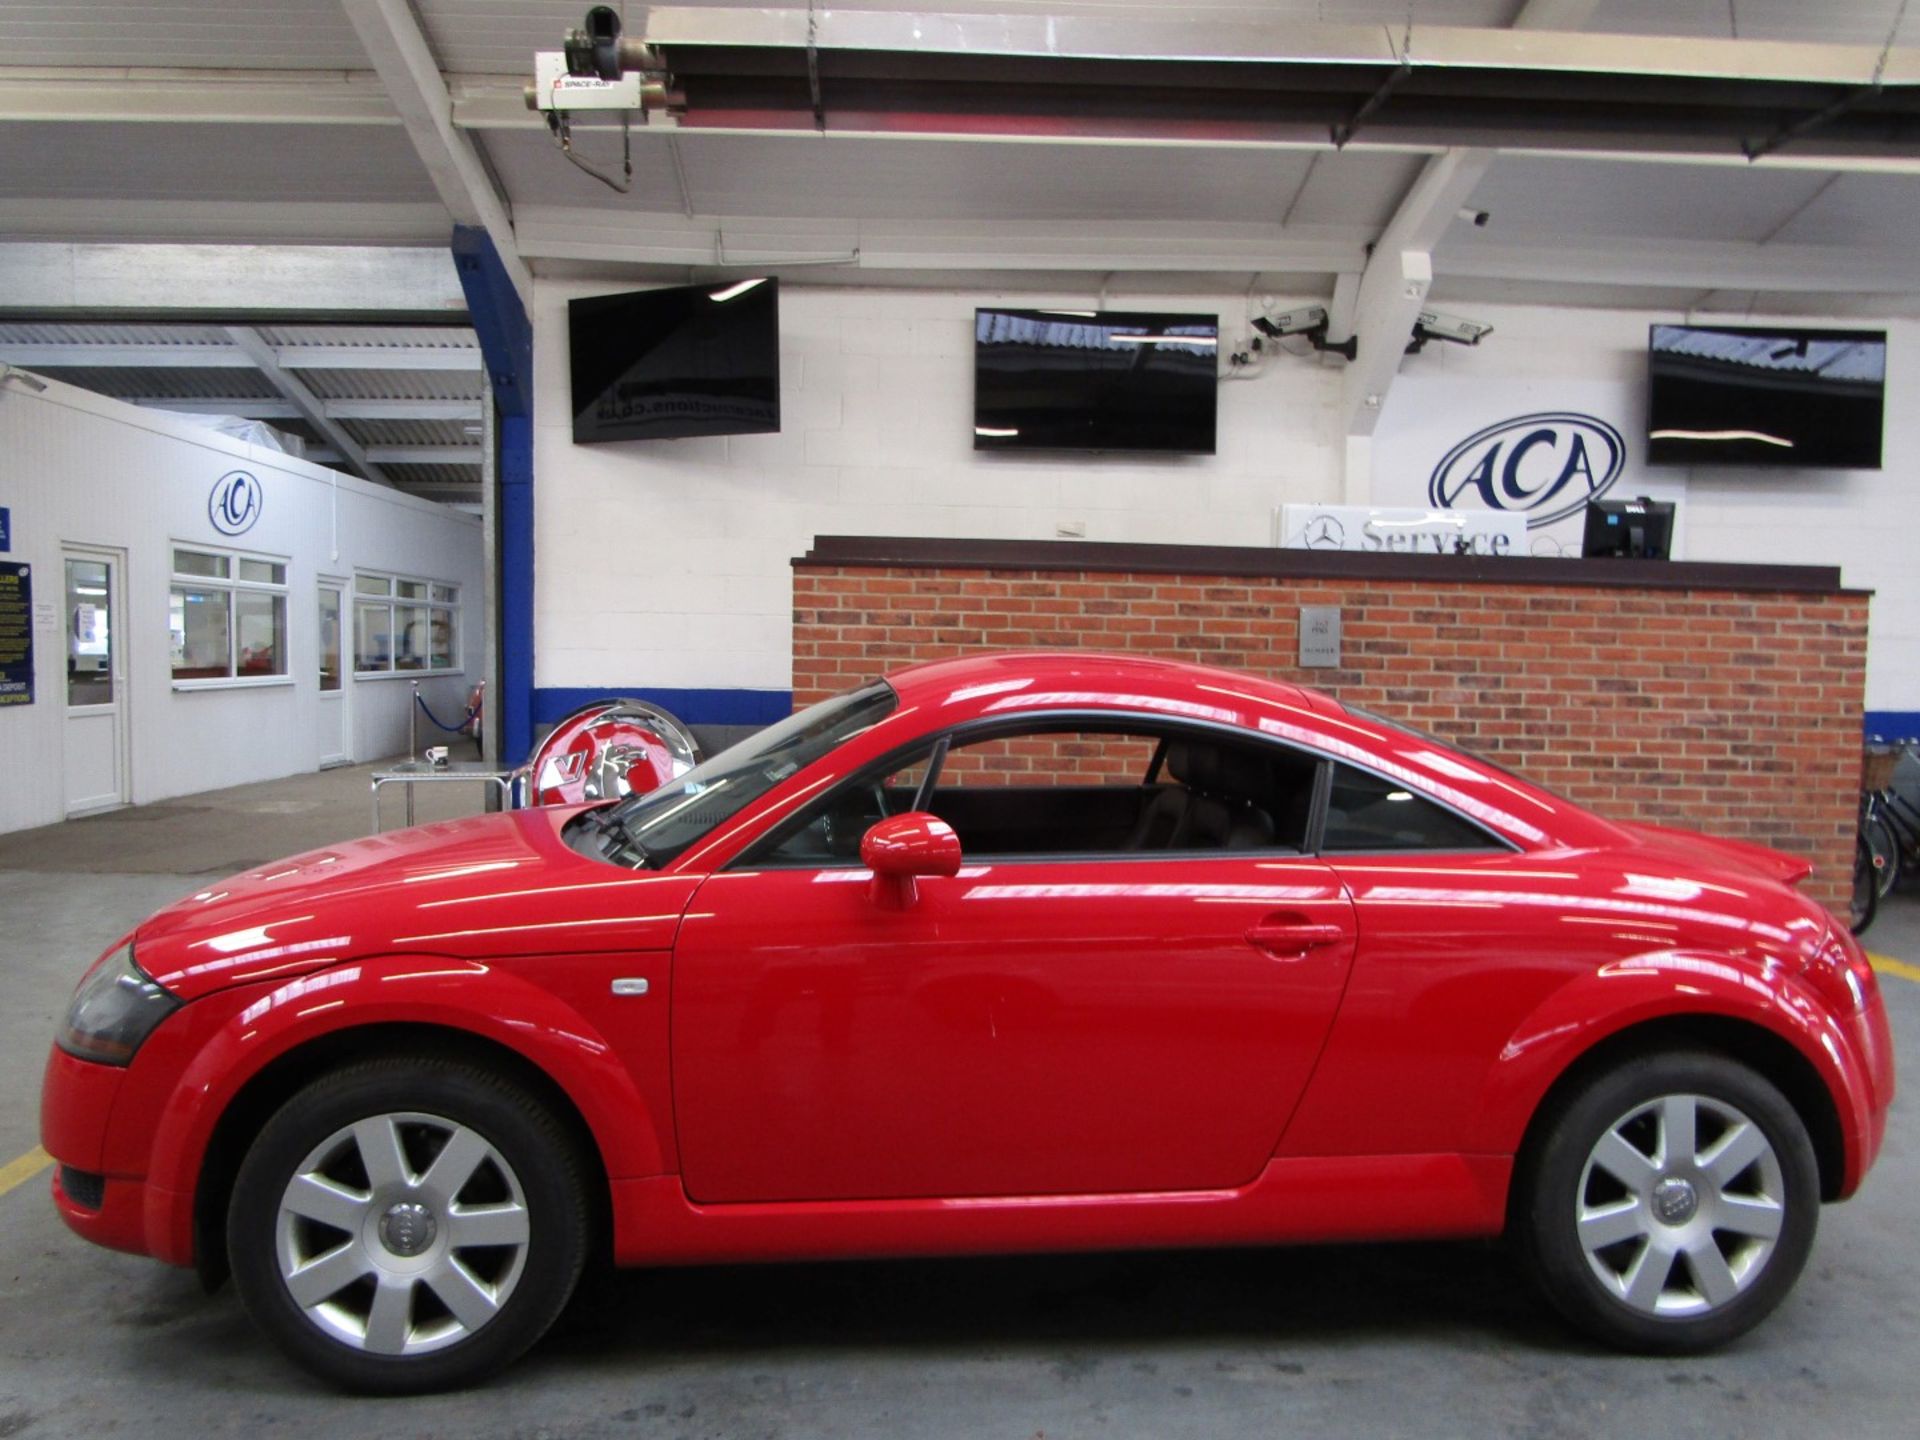 04 54 Audi TT Coupe - Image 18 of 18